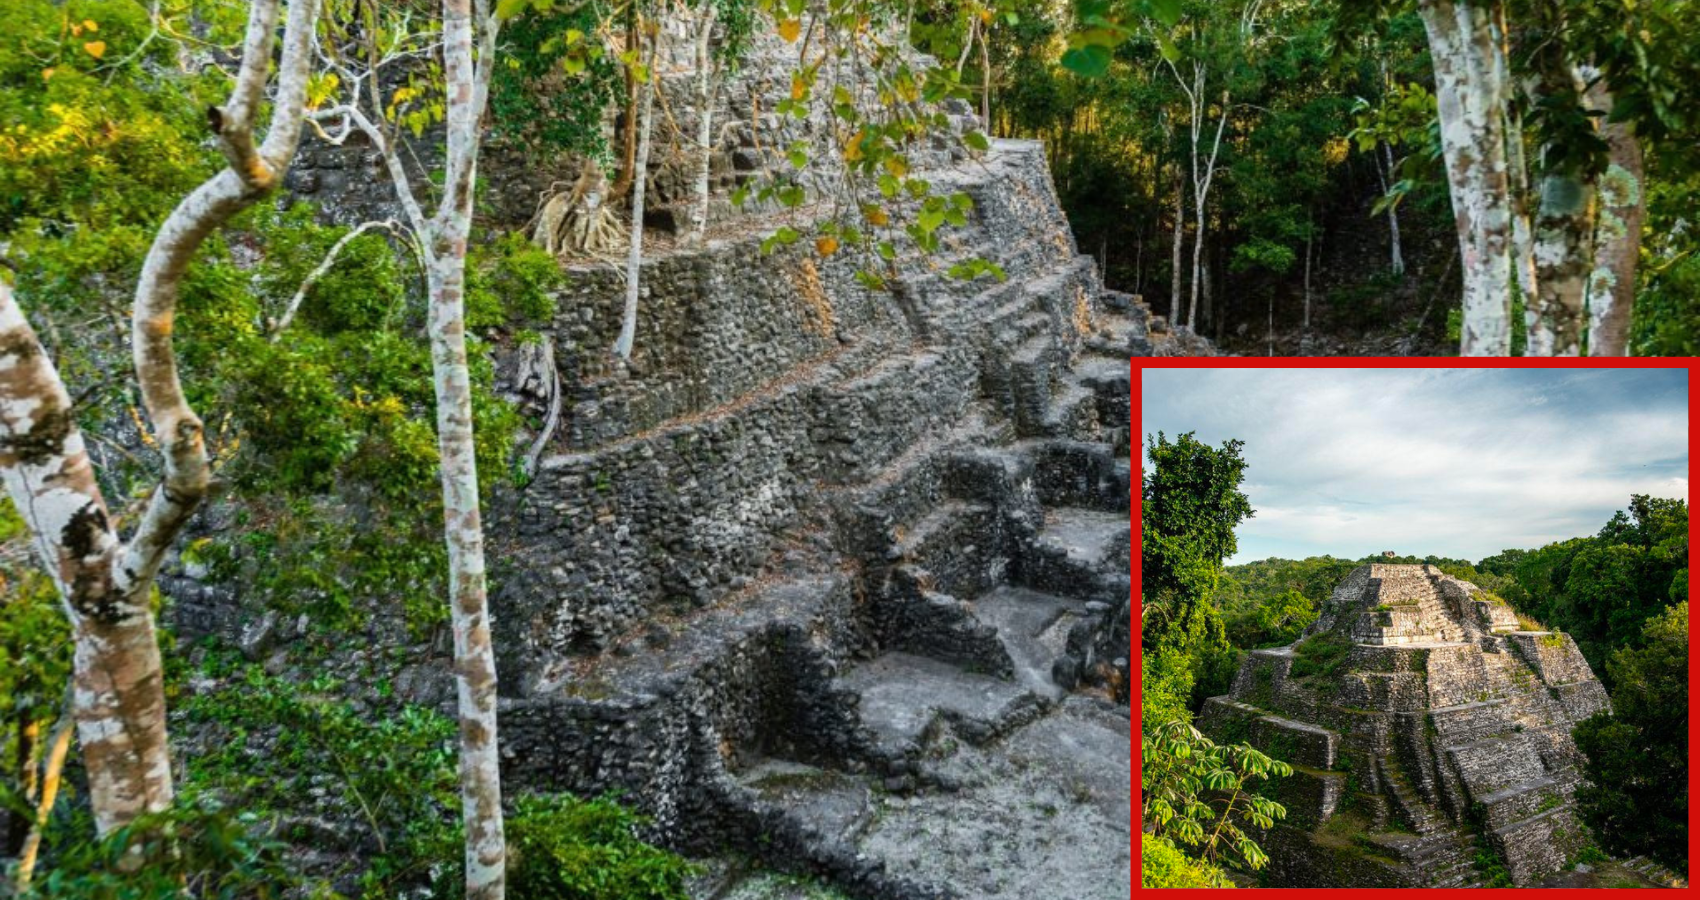 Researchers Using Laser Technology Have Located Nearly 1,000 Previously Unknown Maya Settlements in Guatemala